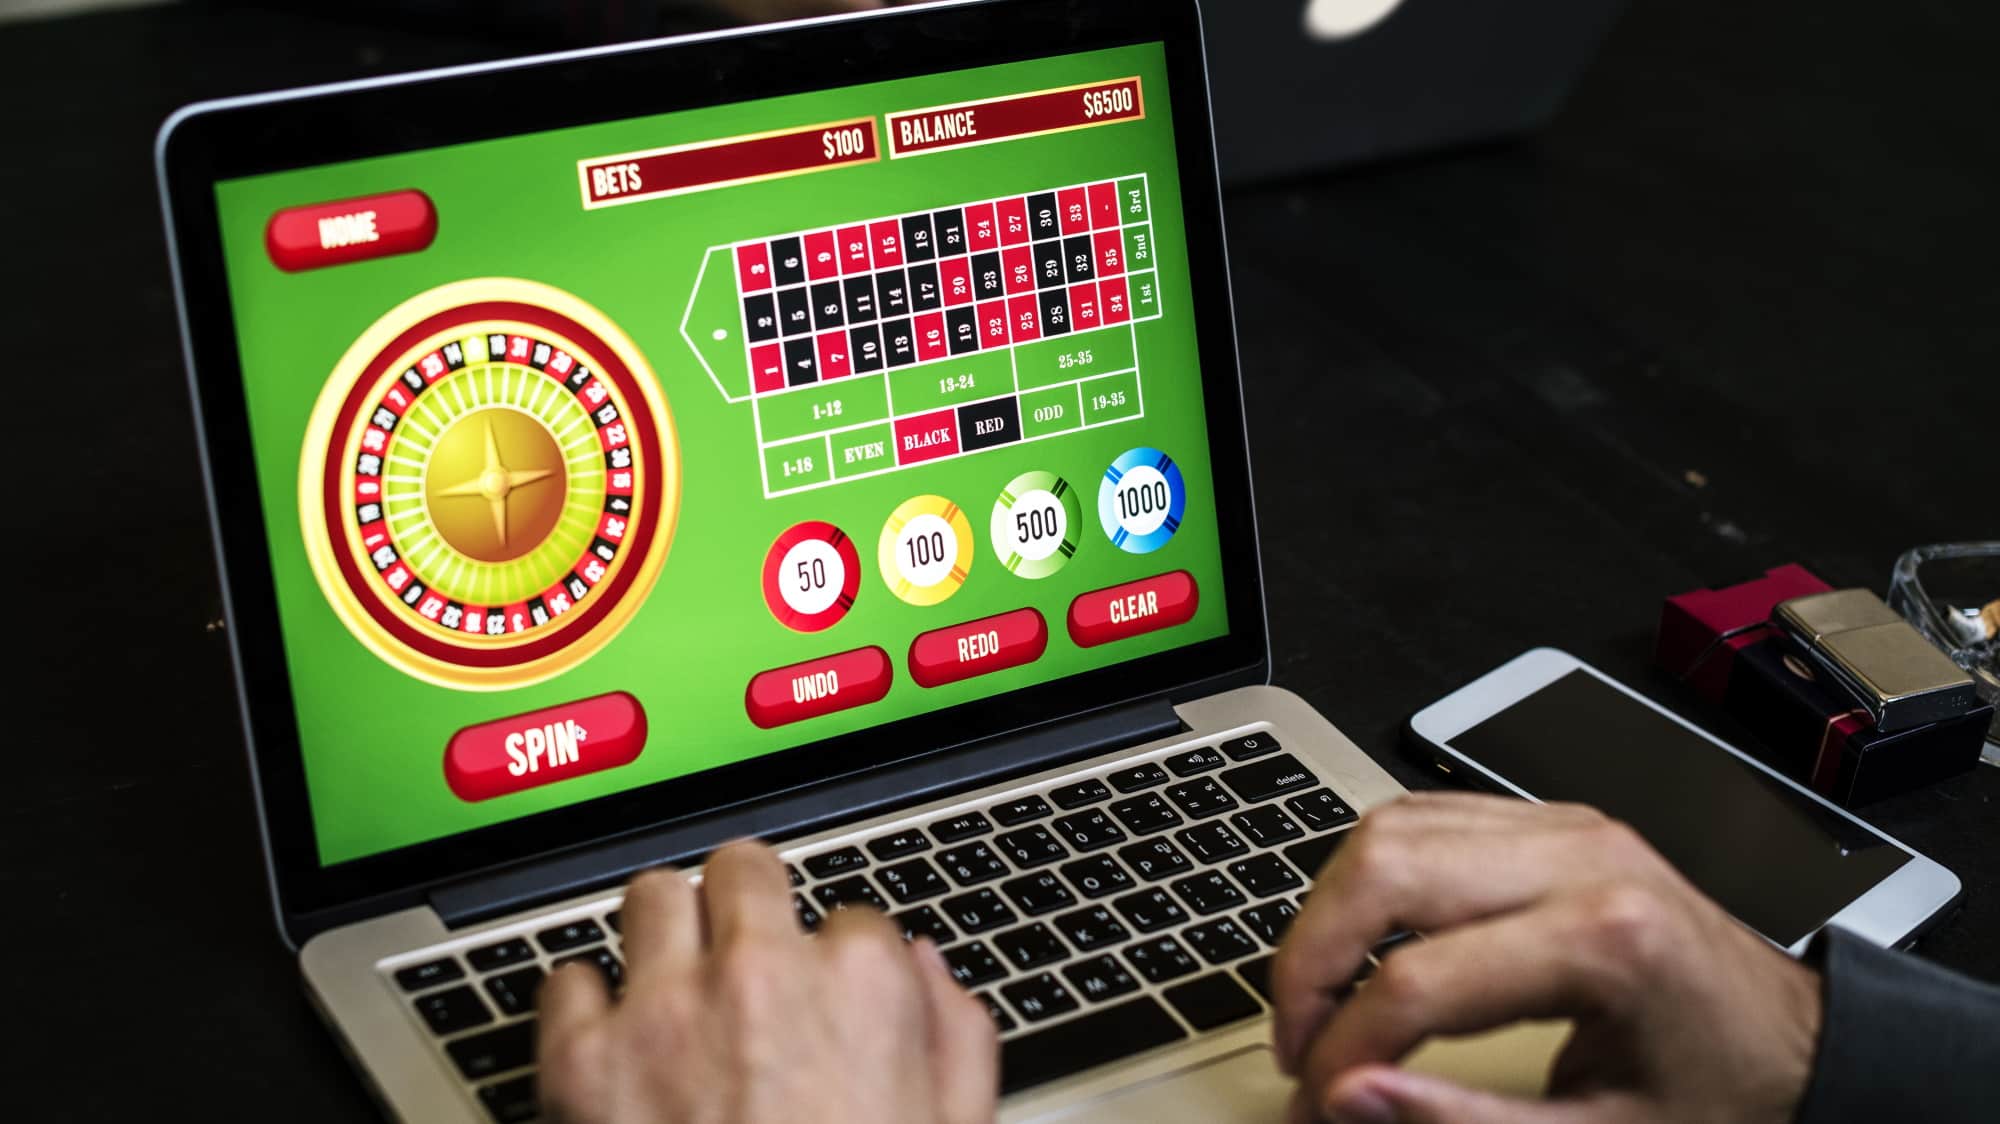 Are You Struggling With best online casinos? Let's Chat